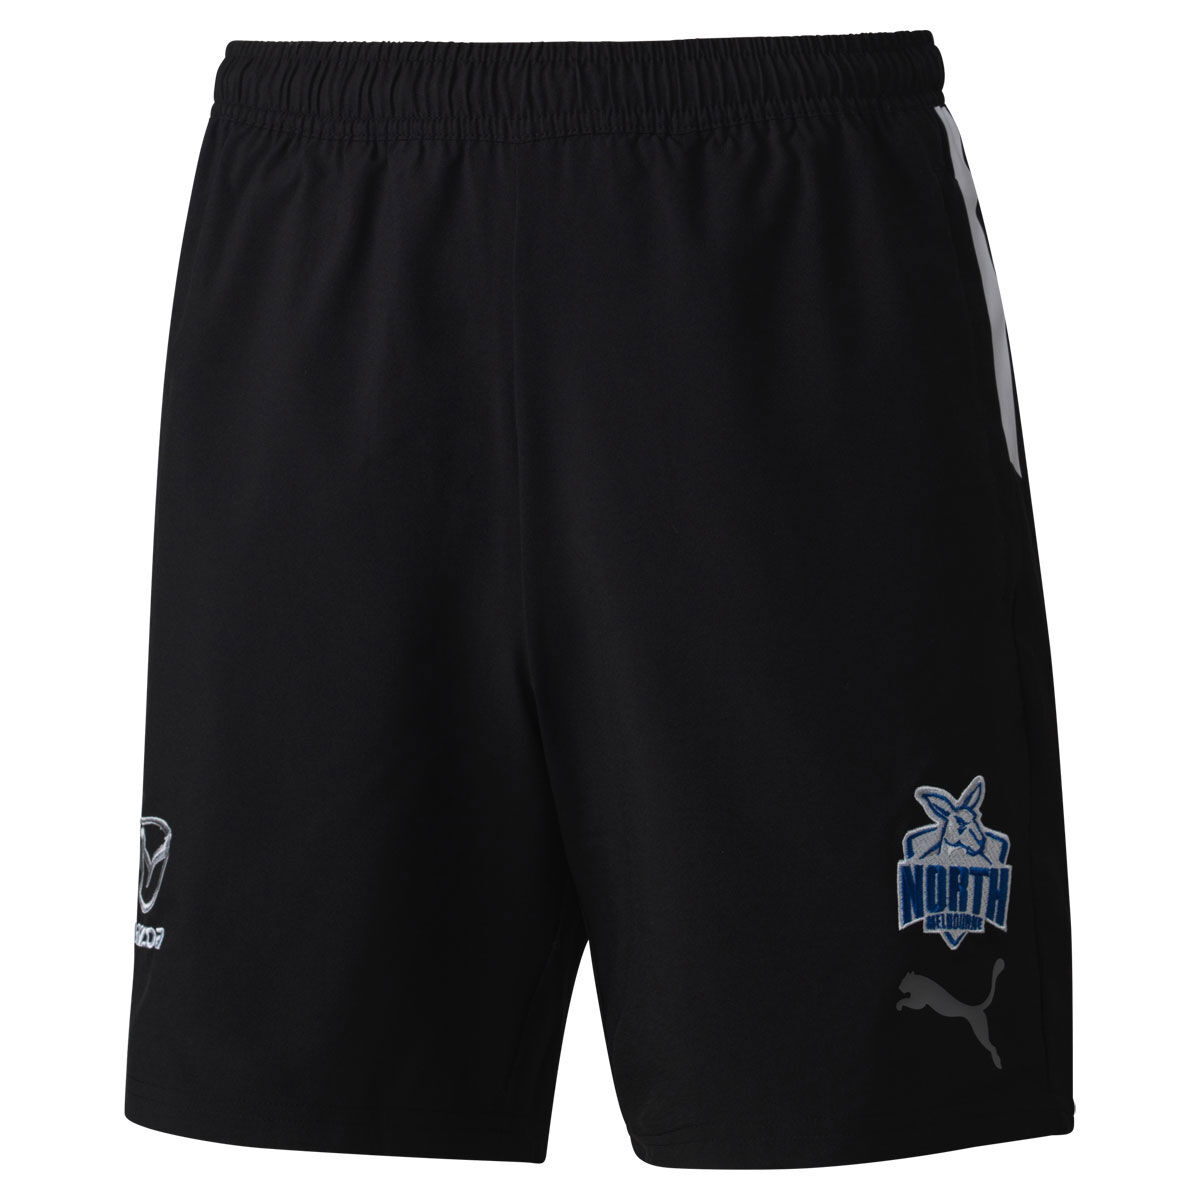 Details about   North Melbourne Kangaroos 2021 AFL Mens Training Gym Shorts Sizes S-5XL BNWT 